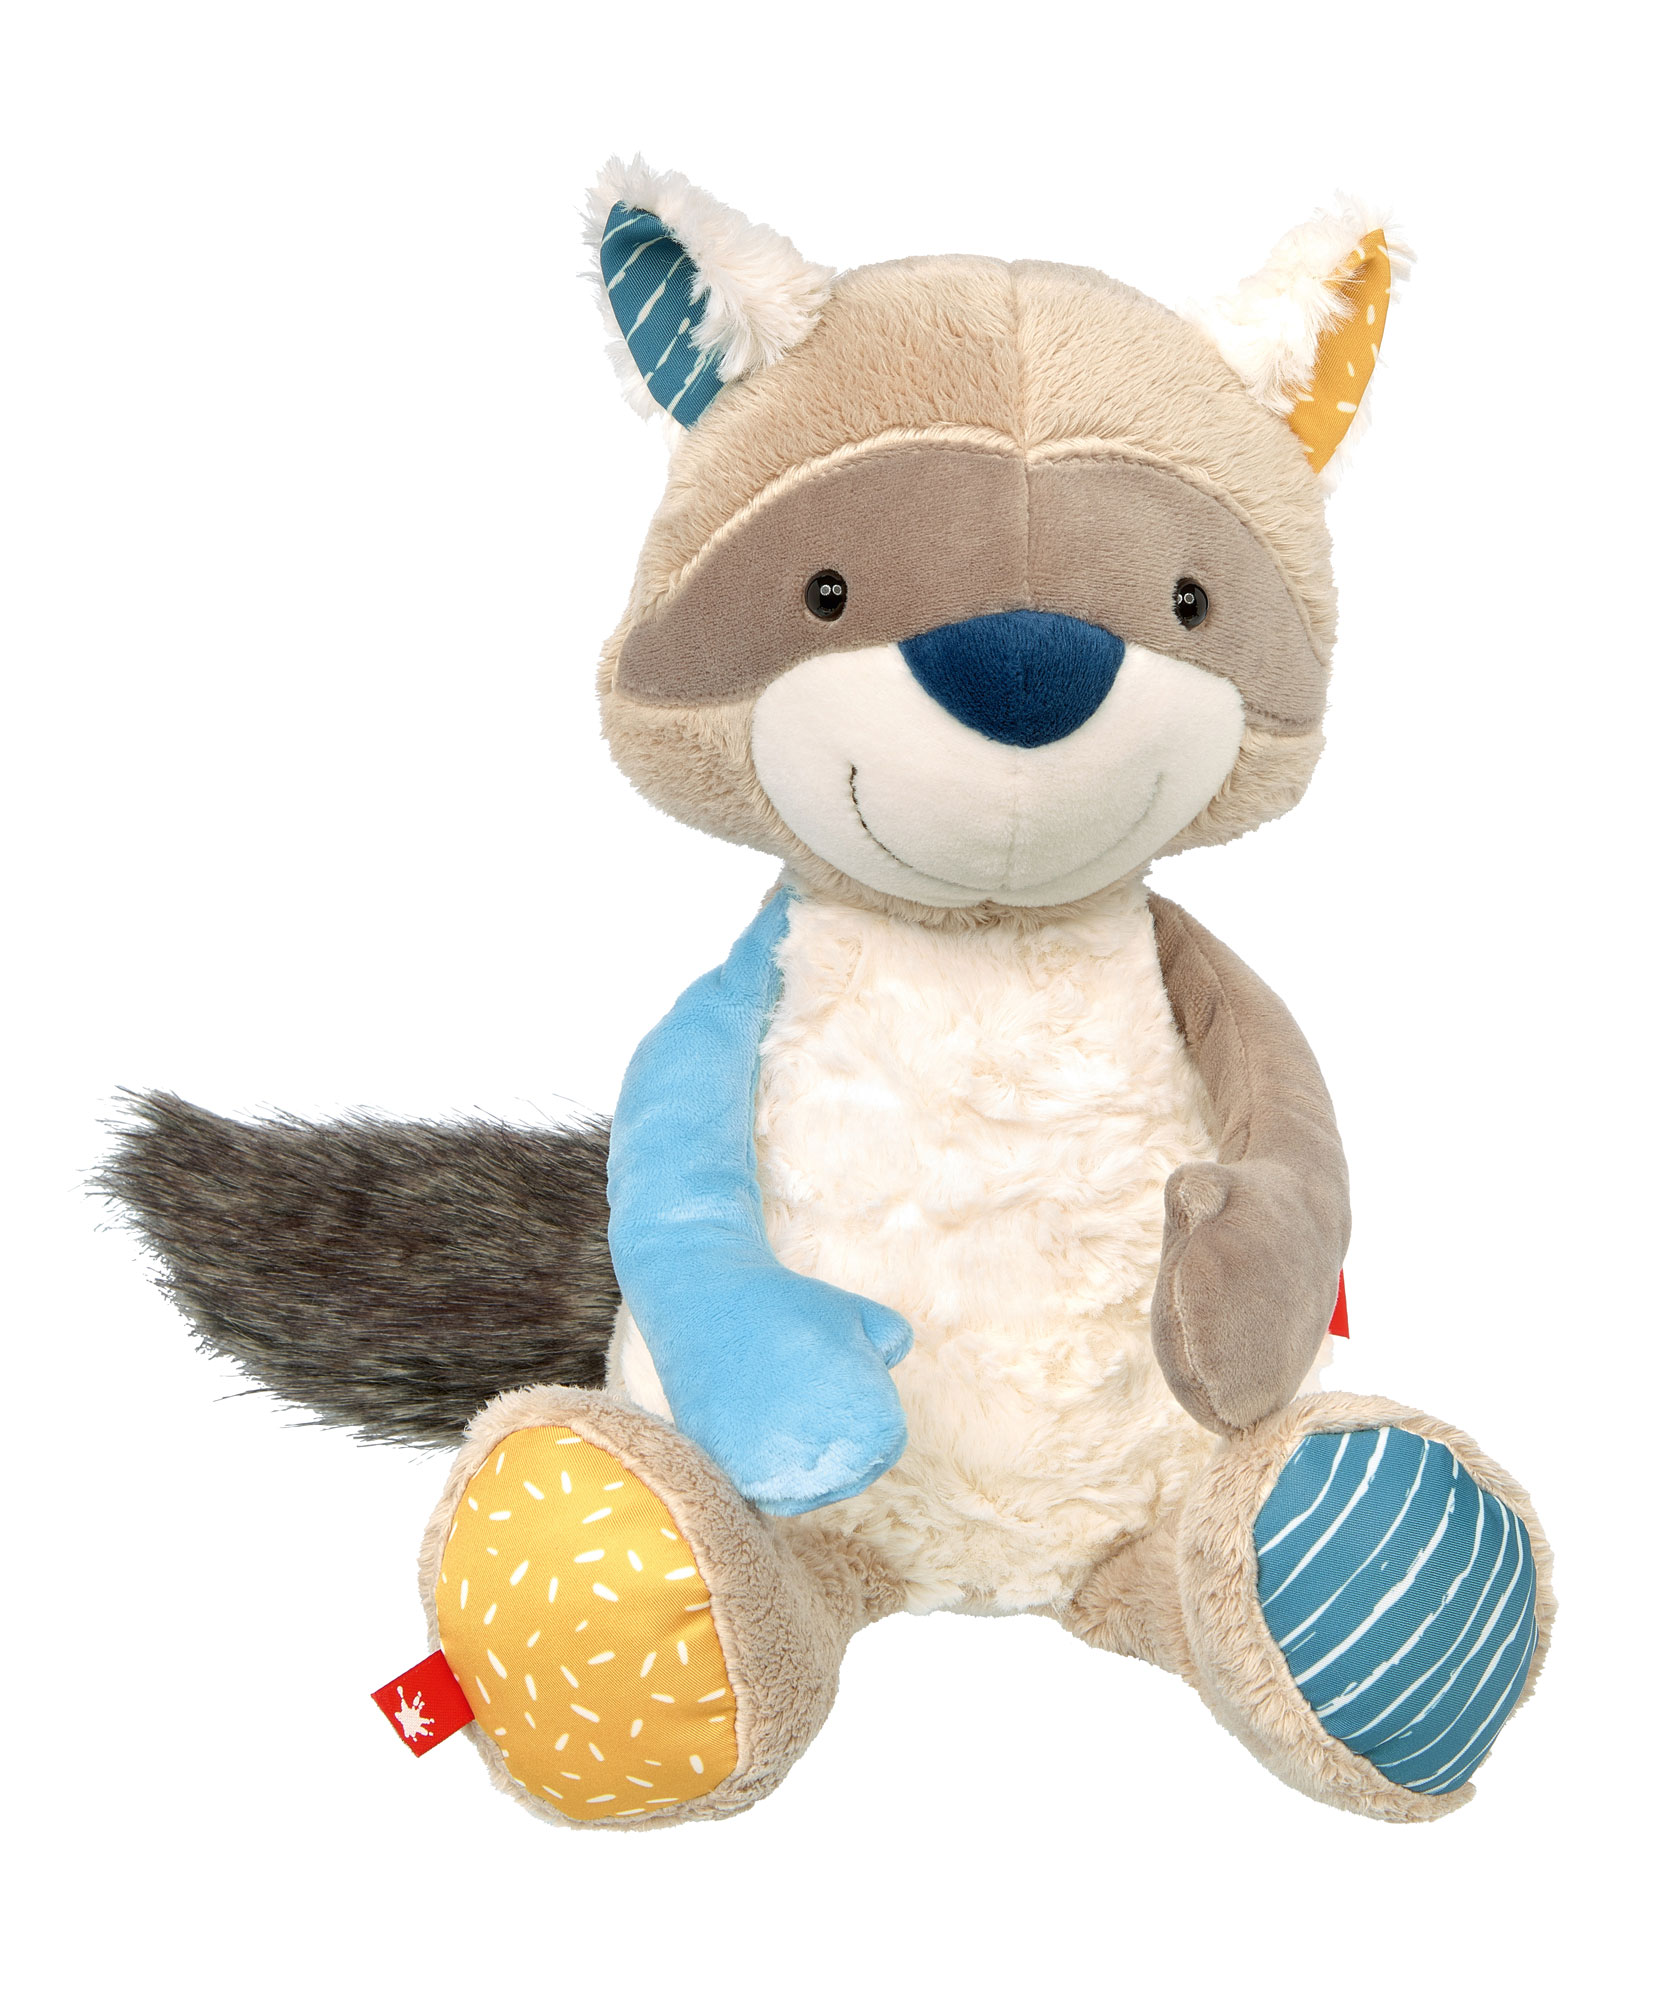 Plush toy racoon, Patchwork Sweety